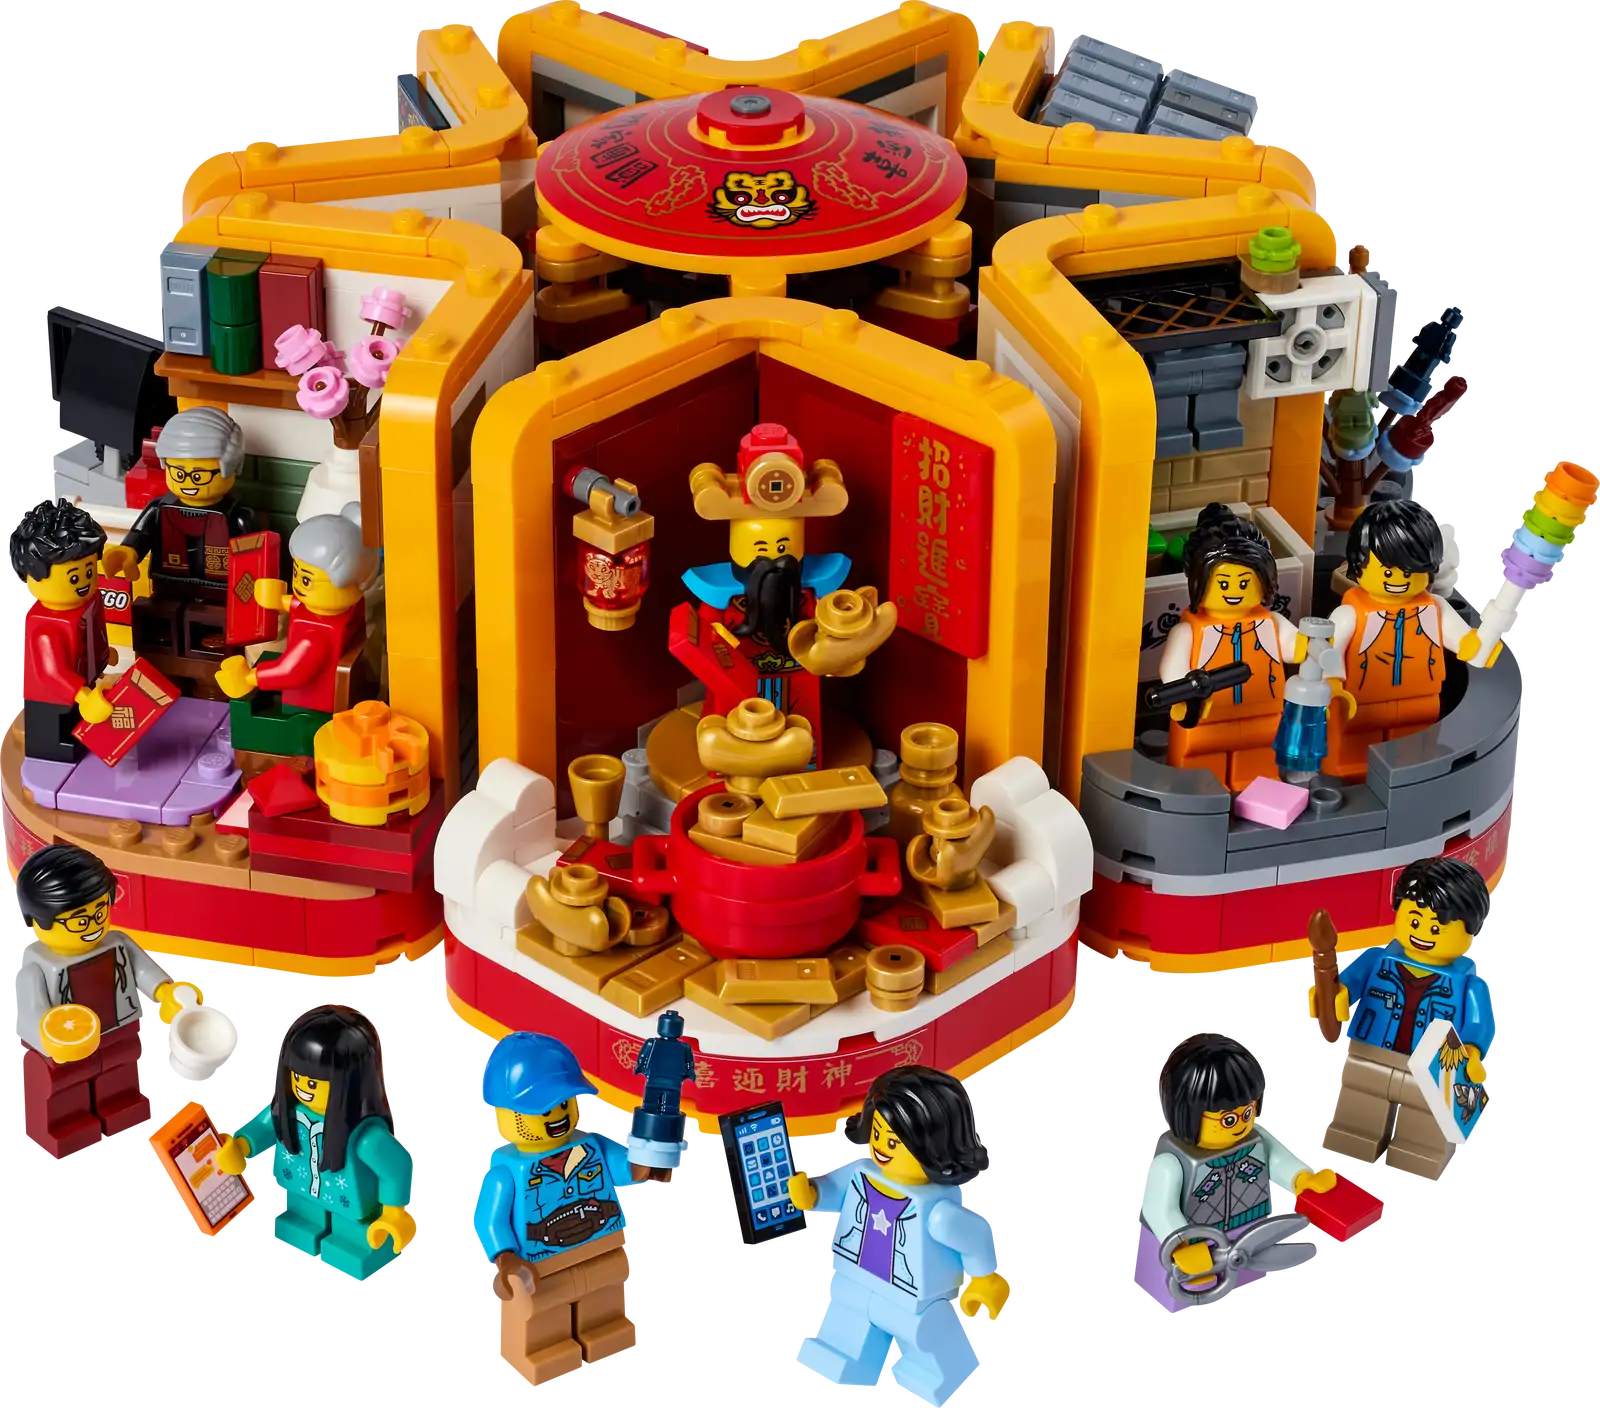 LEGO Chinese Festivals: Lunar New Year Traditions